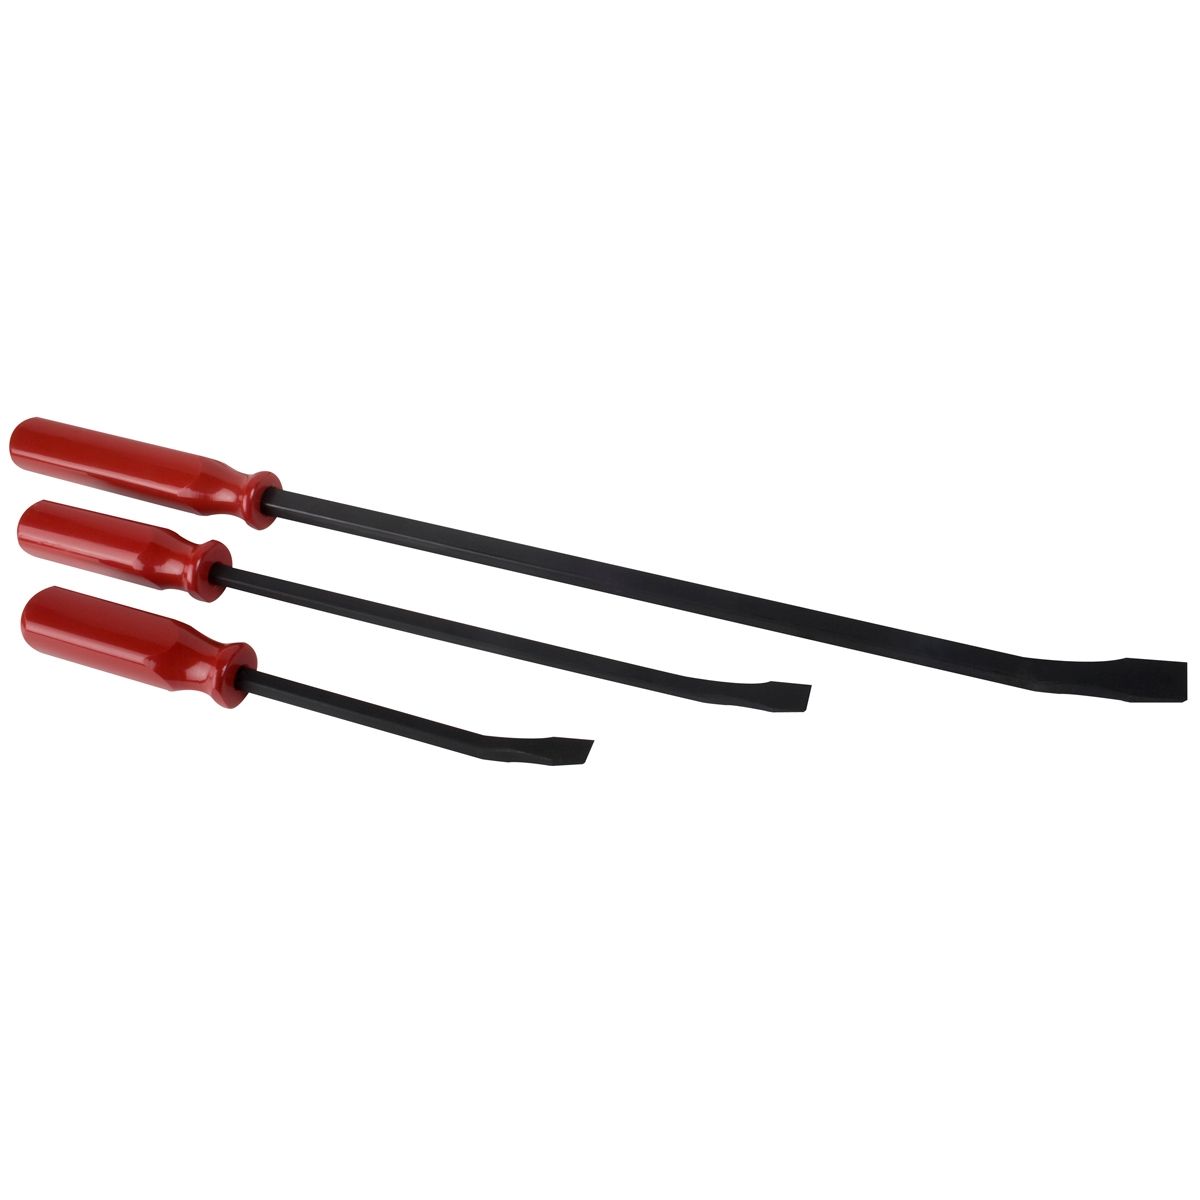 Wtd Lng-853-3st 12, 17 & 25 In. Pry Bar Set - 3 Piece